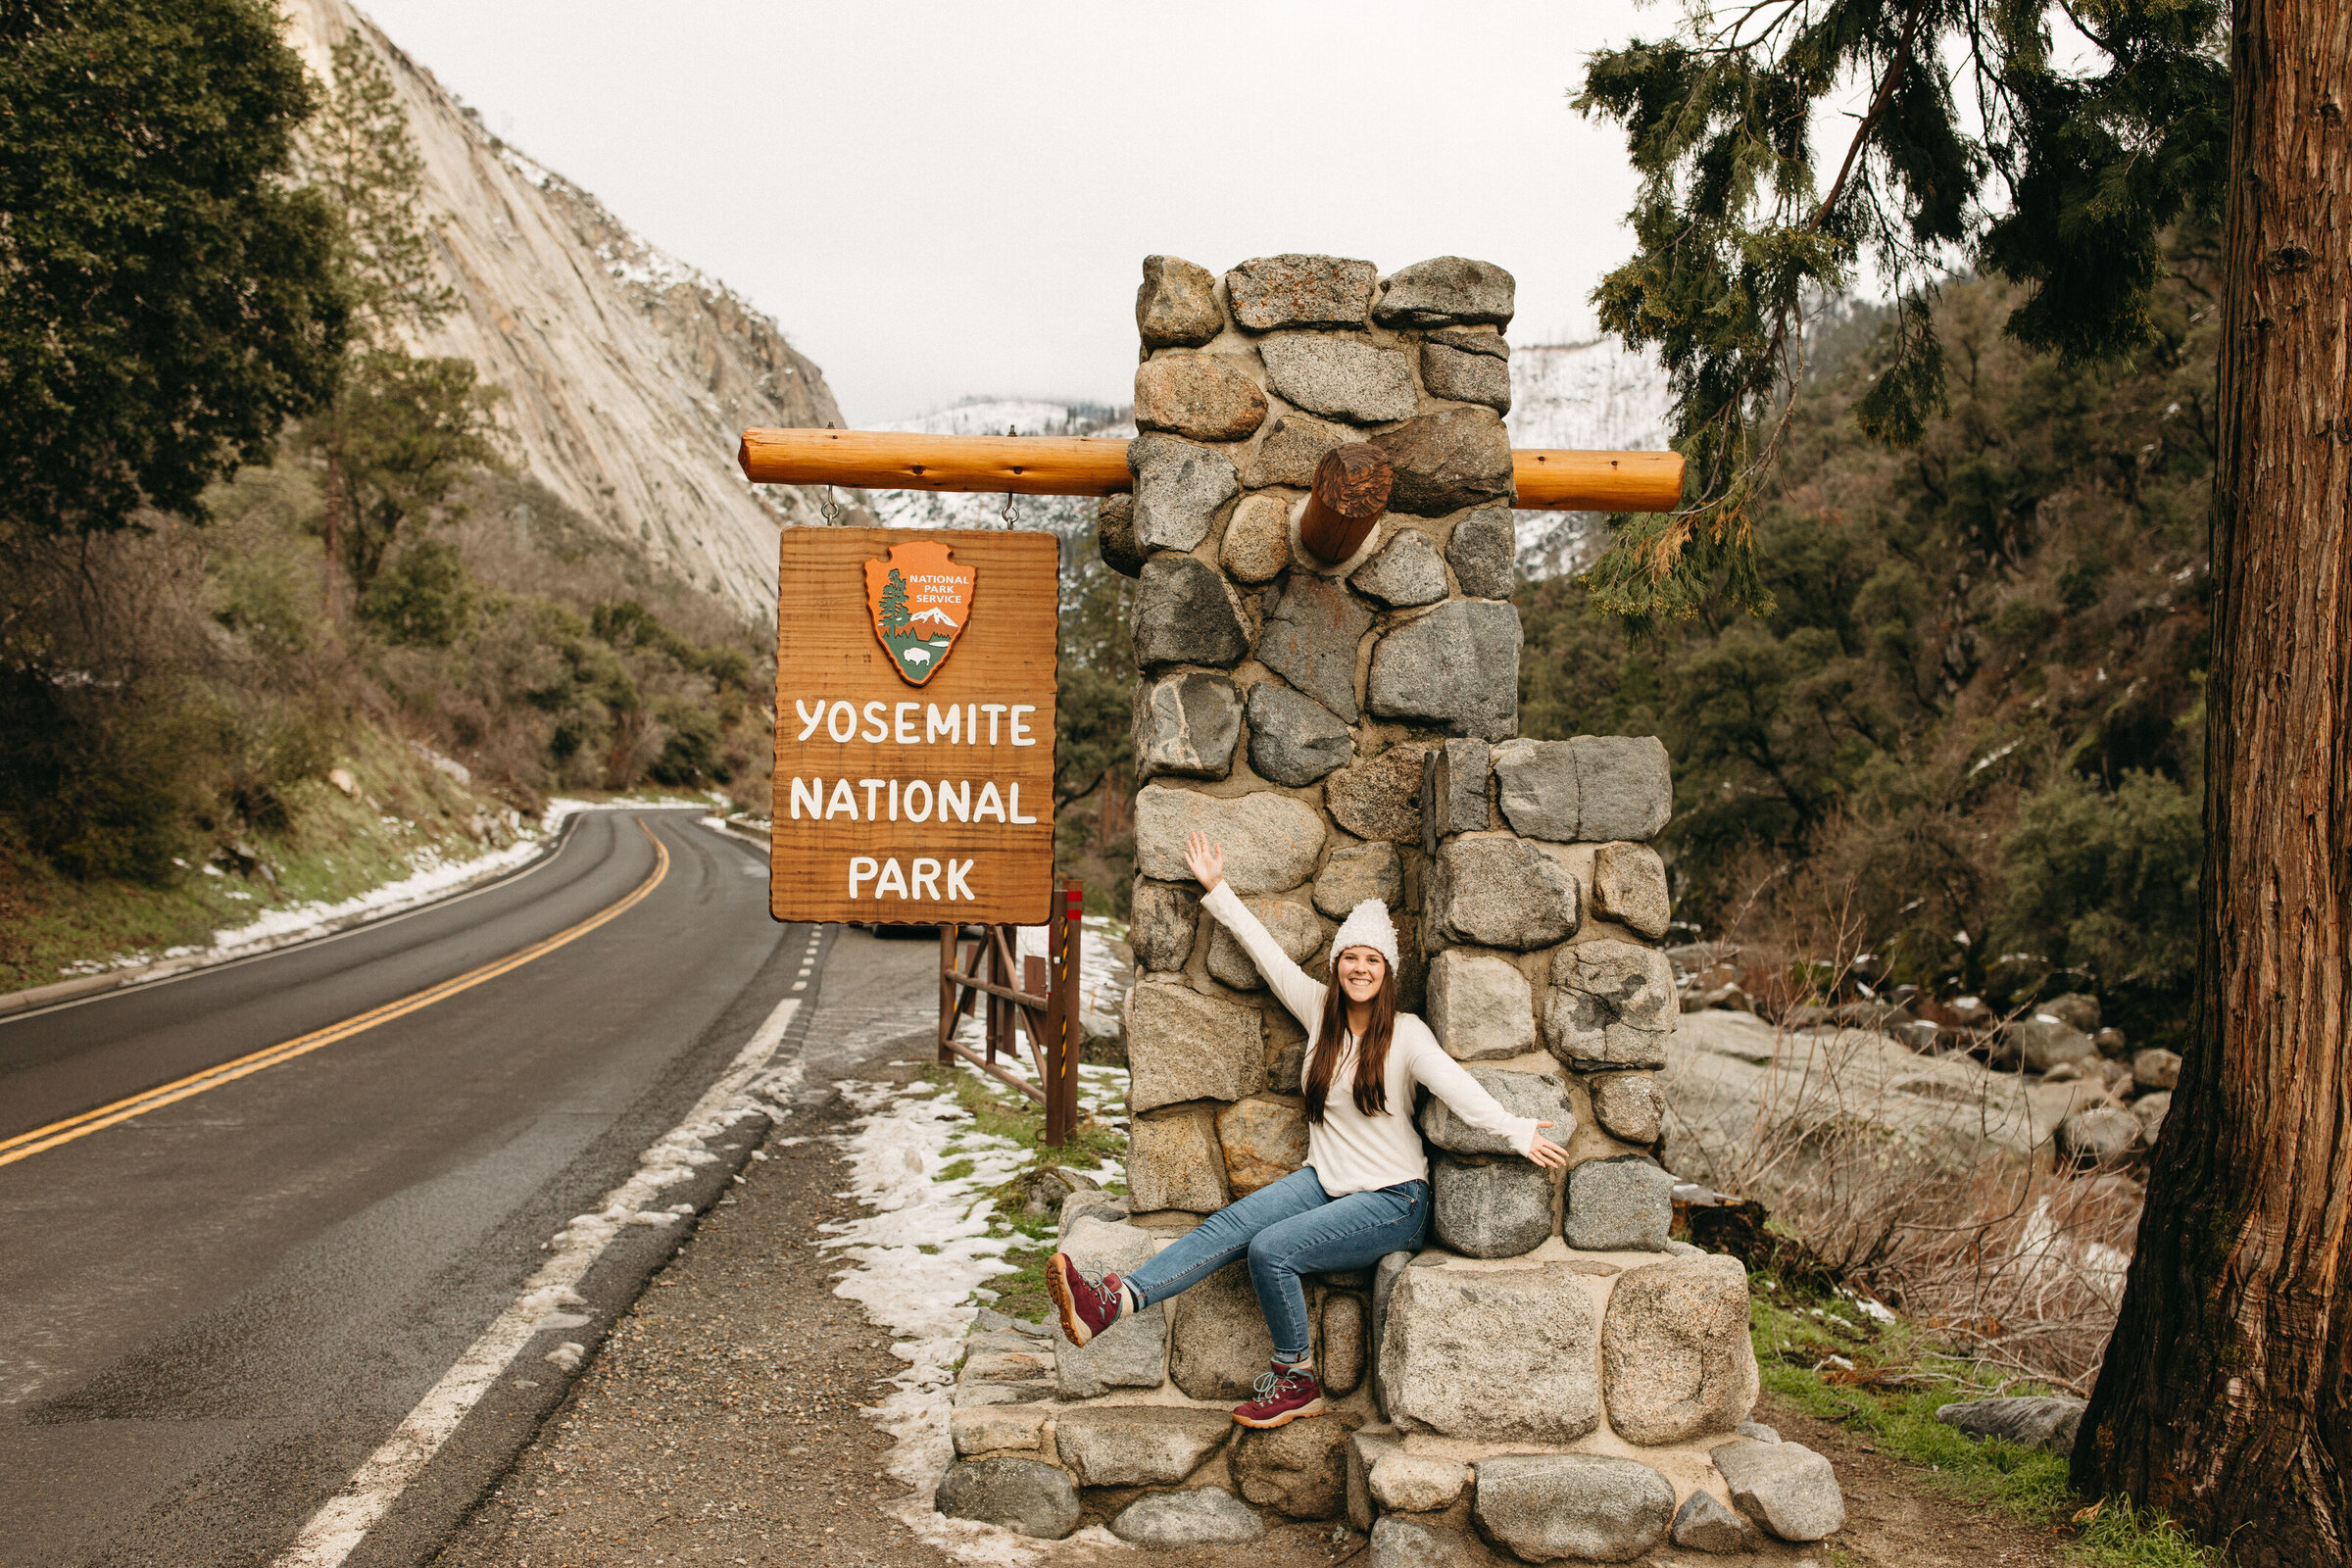 A girl sitting in front of the welcome sign in Yosemite National Park.